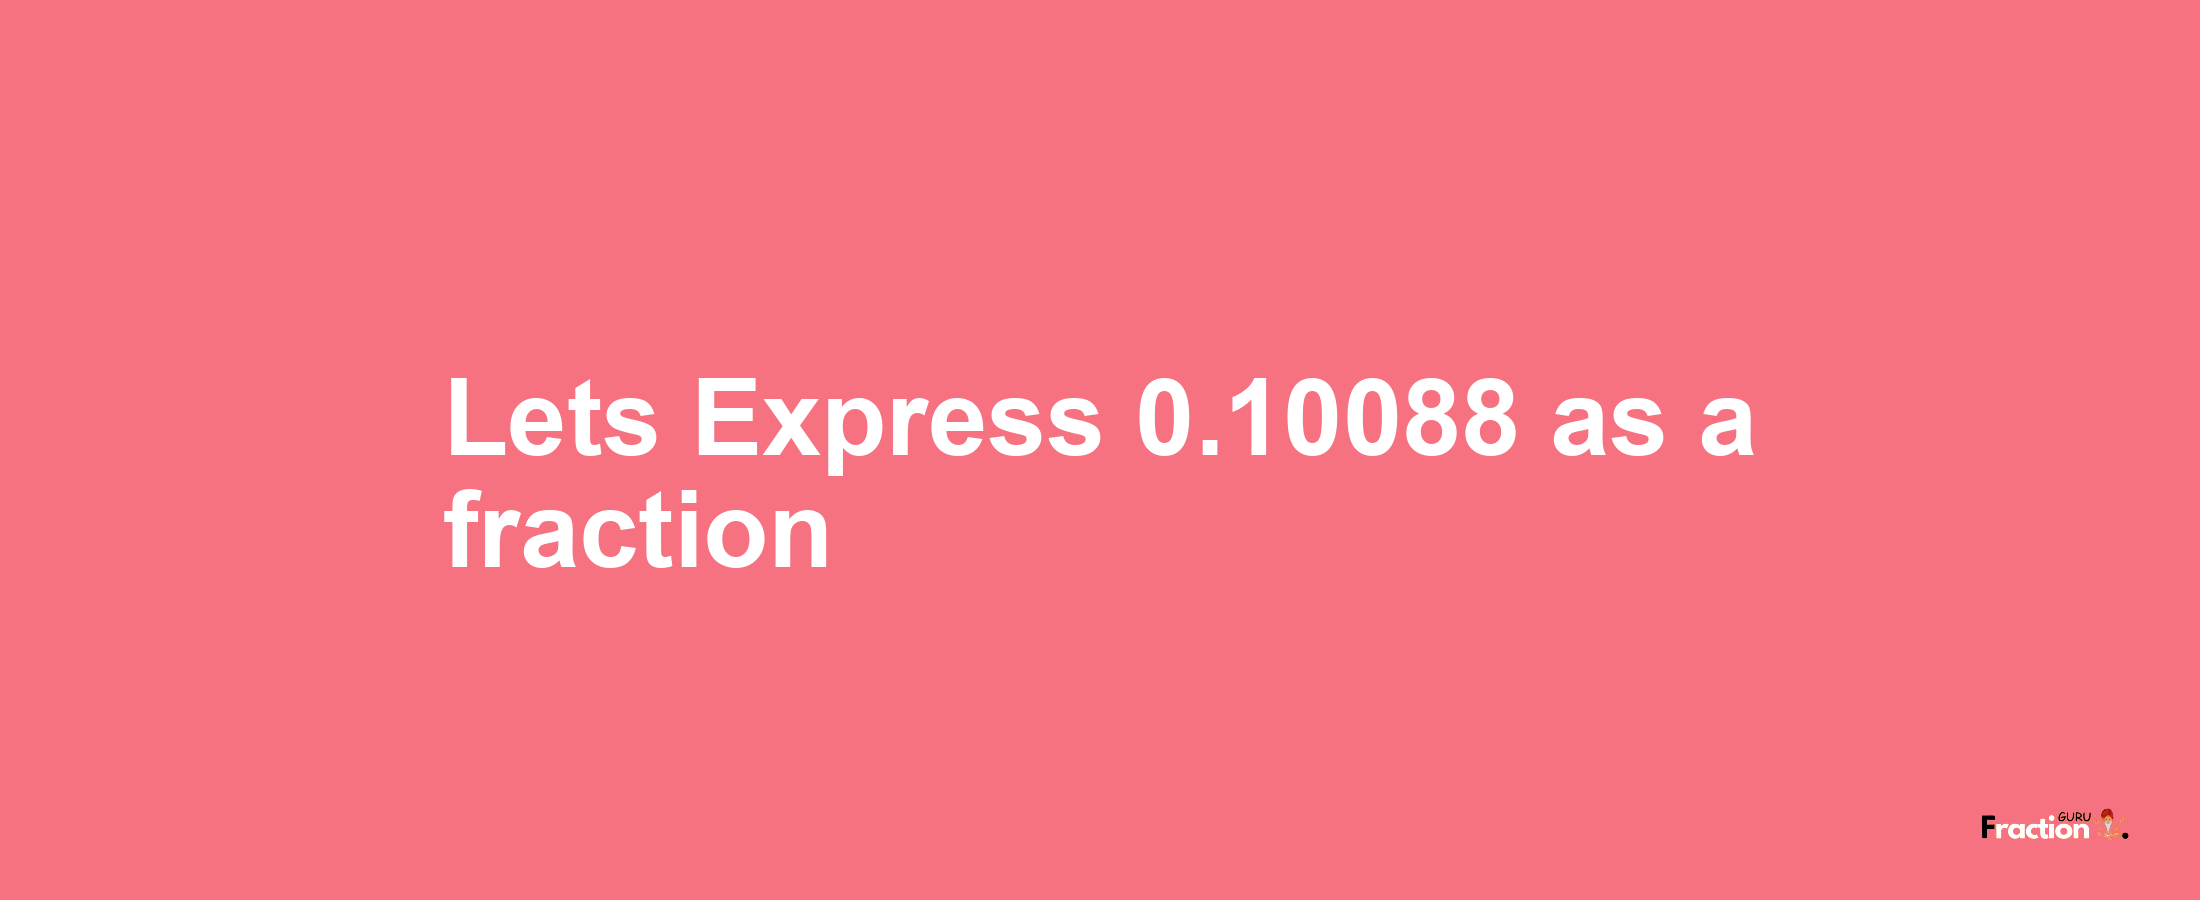 Lets Express 0.10088 as afraction